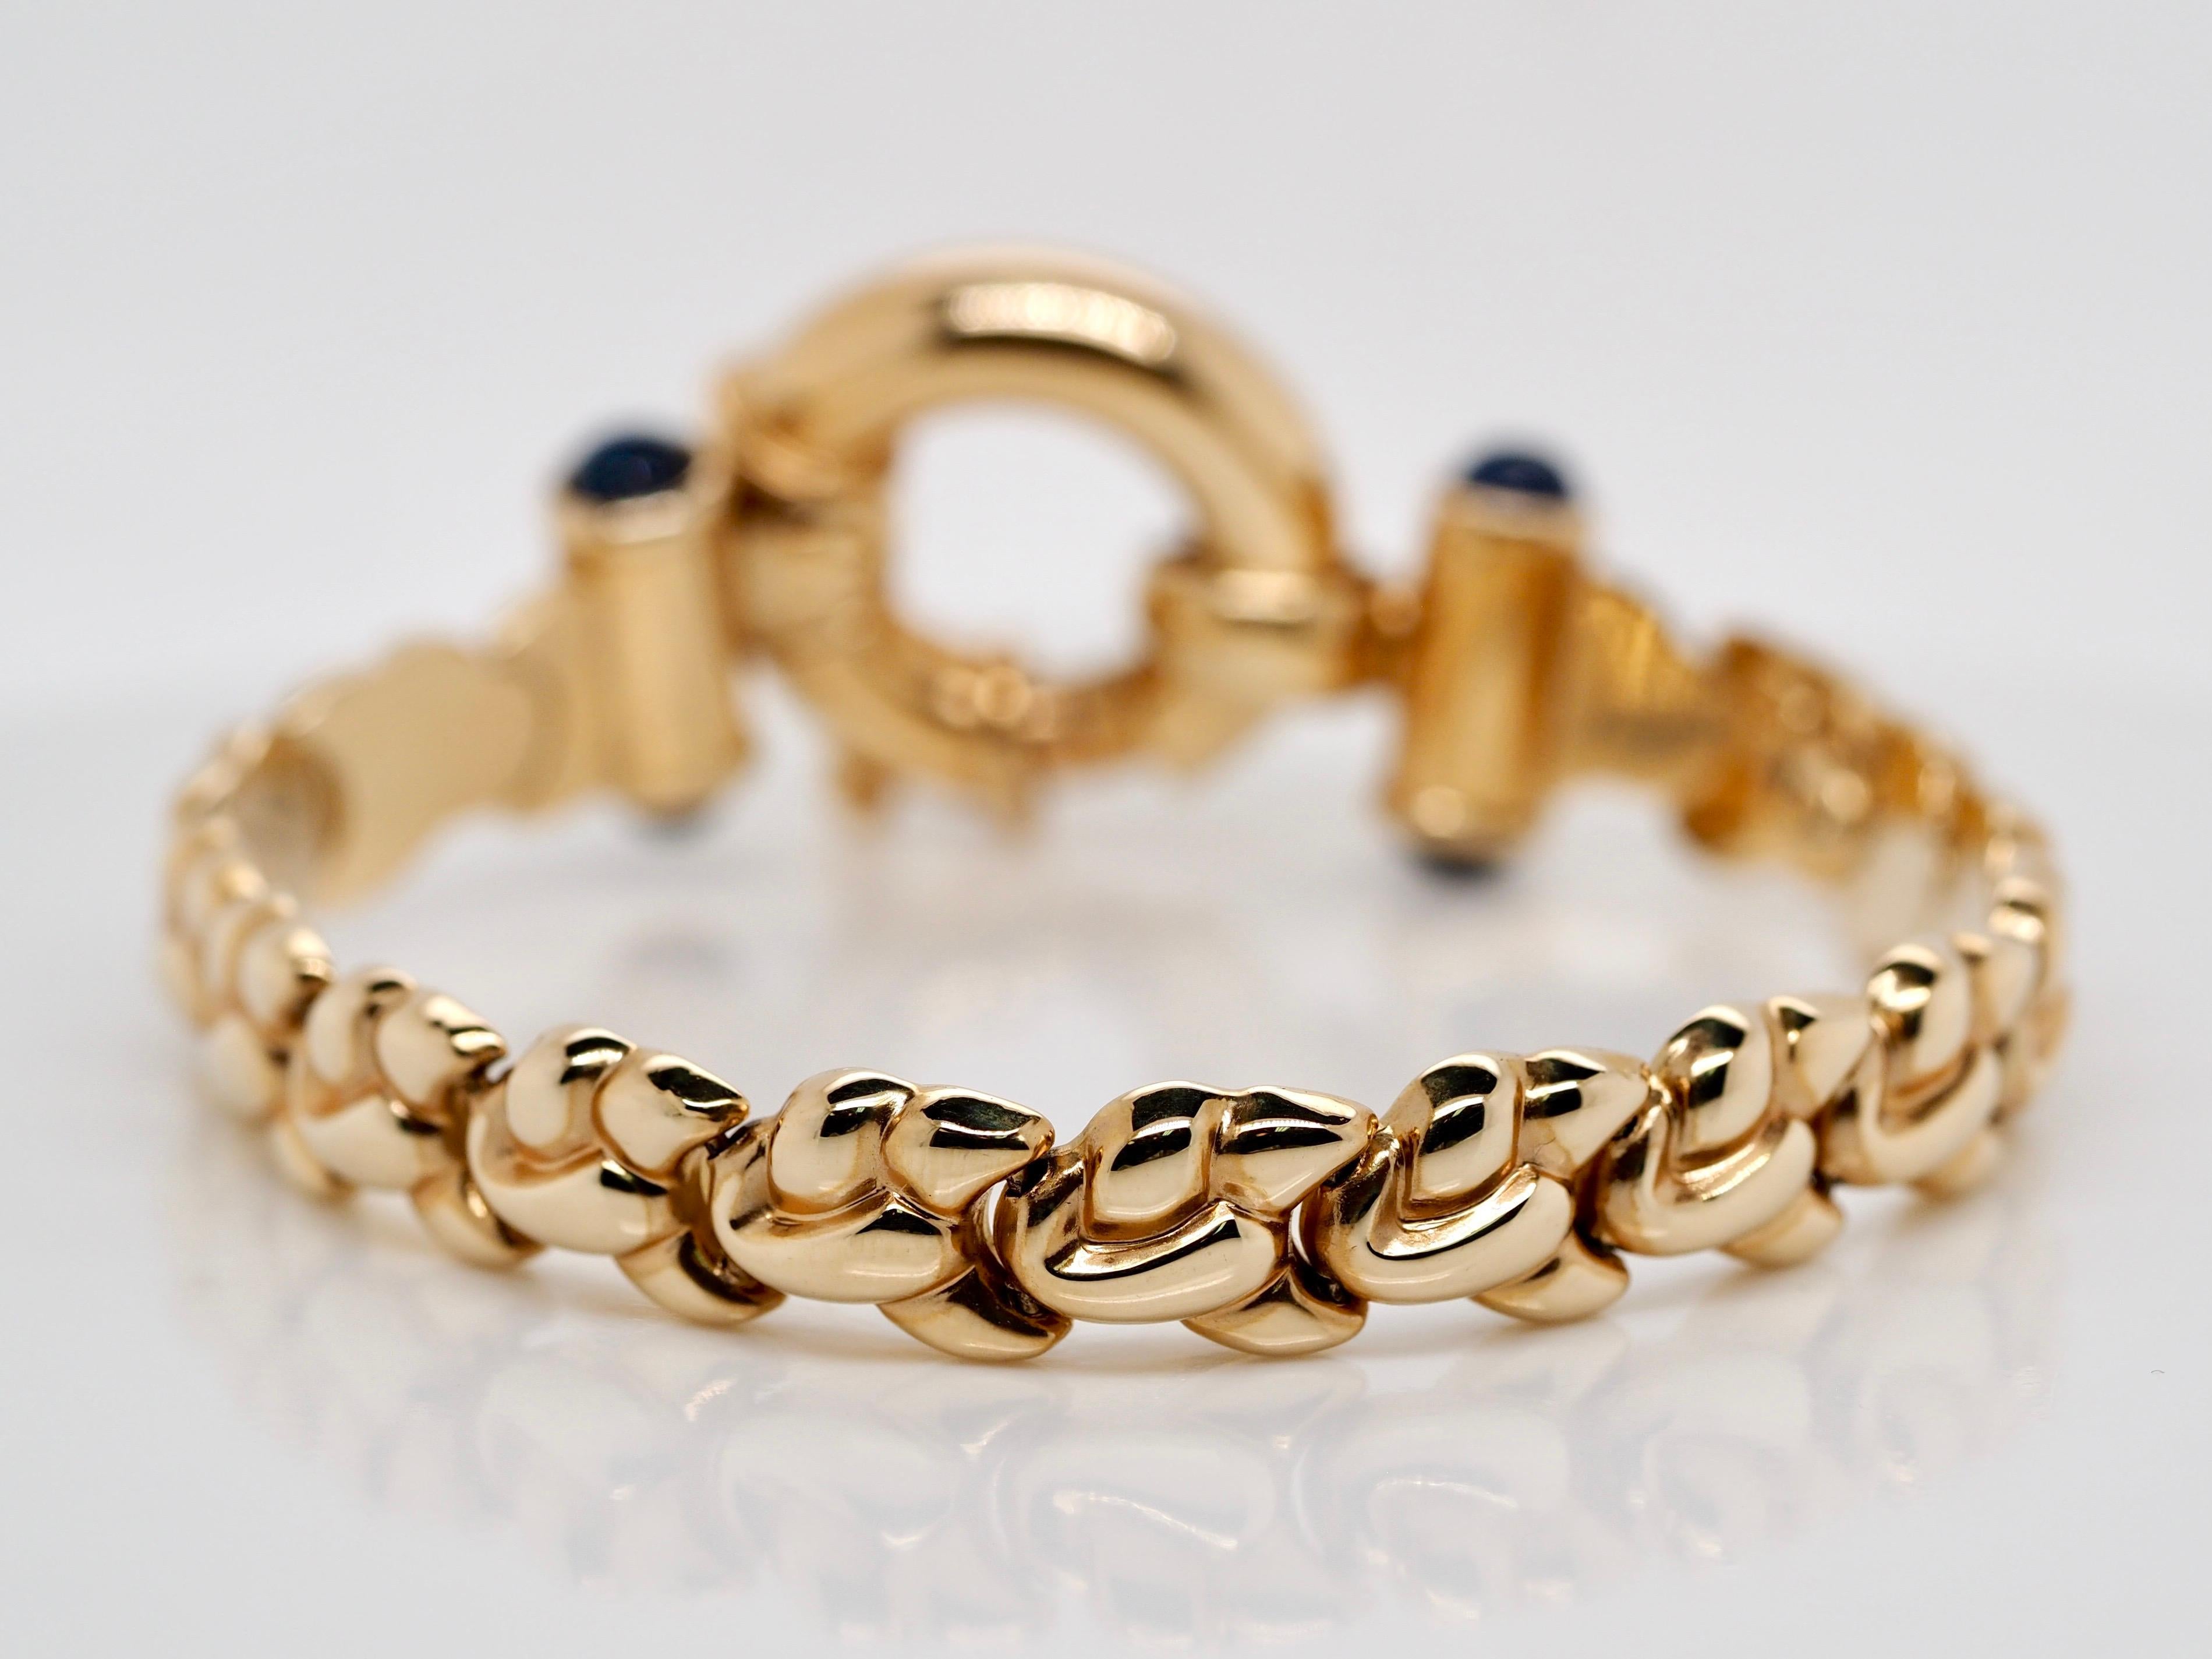 Retro 14 karat Yellow Gold Geometric link Bracelet. It includes a large bolt clasp with a round Cabochon Sapphire on the sides. This stunning vintage Italian piece is in excellent condition and is perfect for any day occasion!

Item Details:
Metal